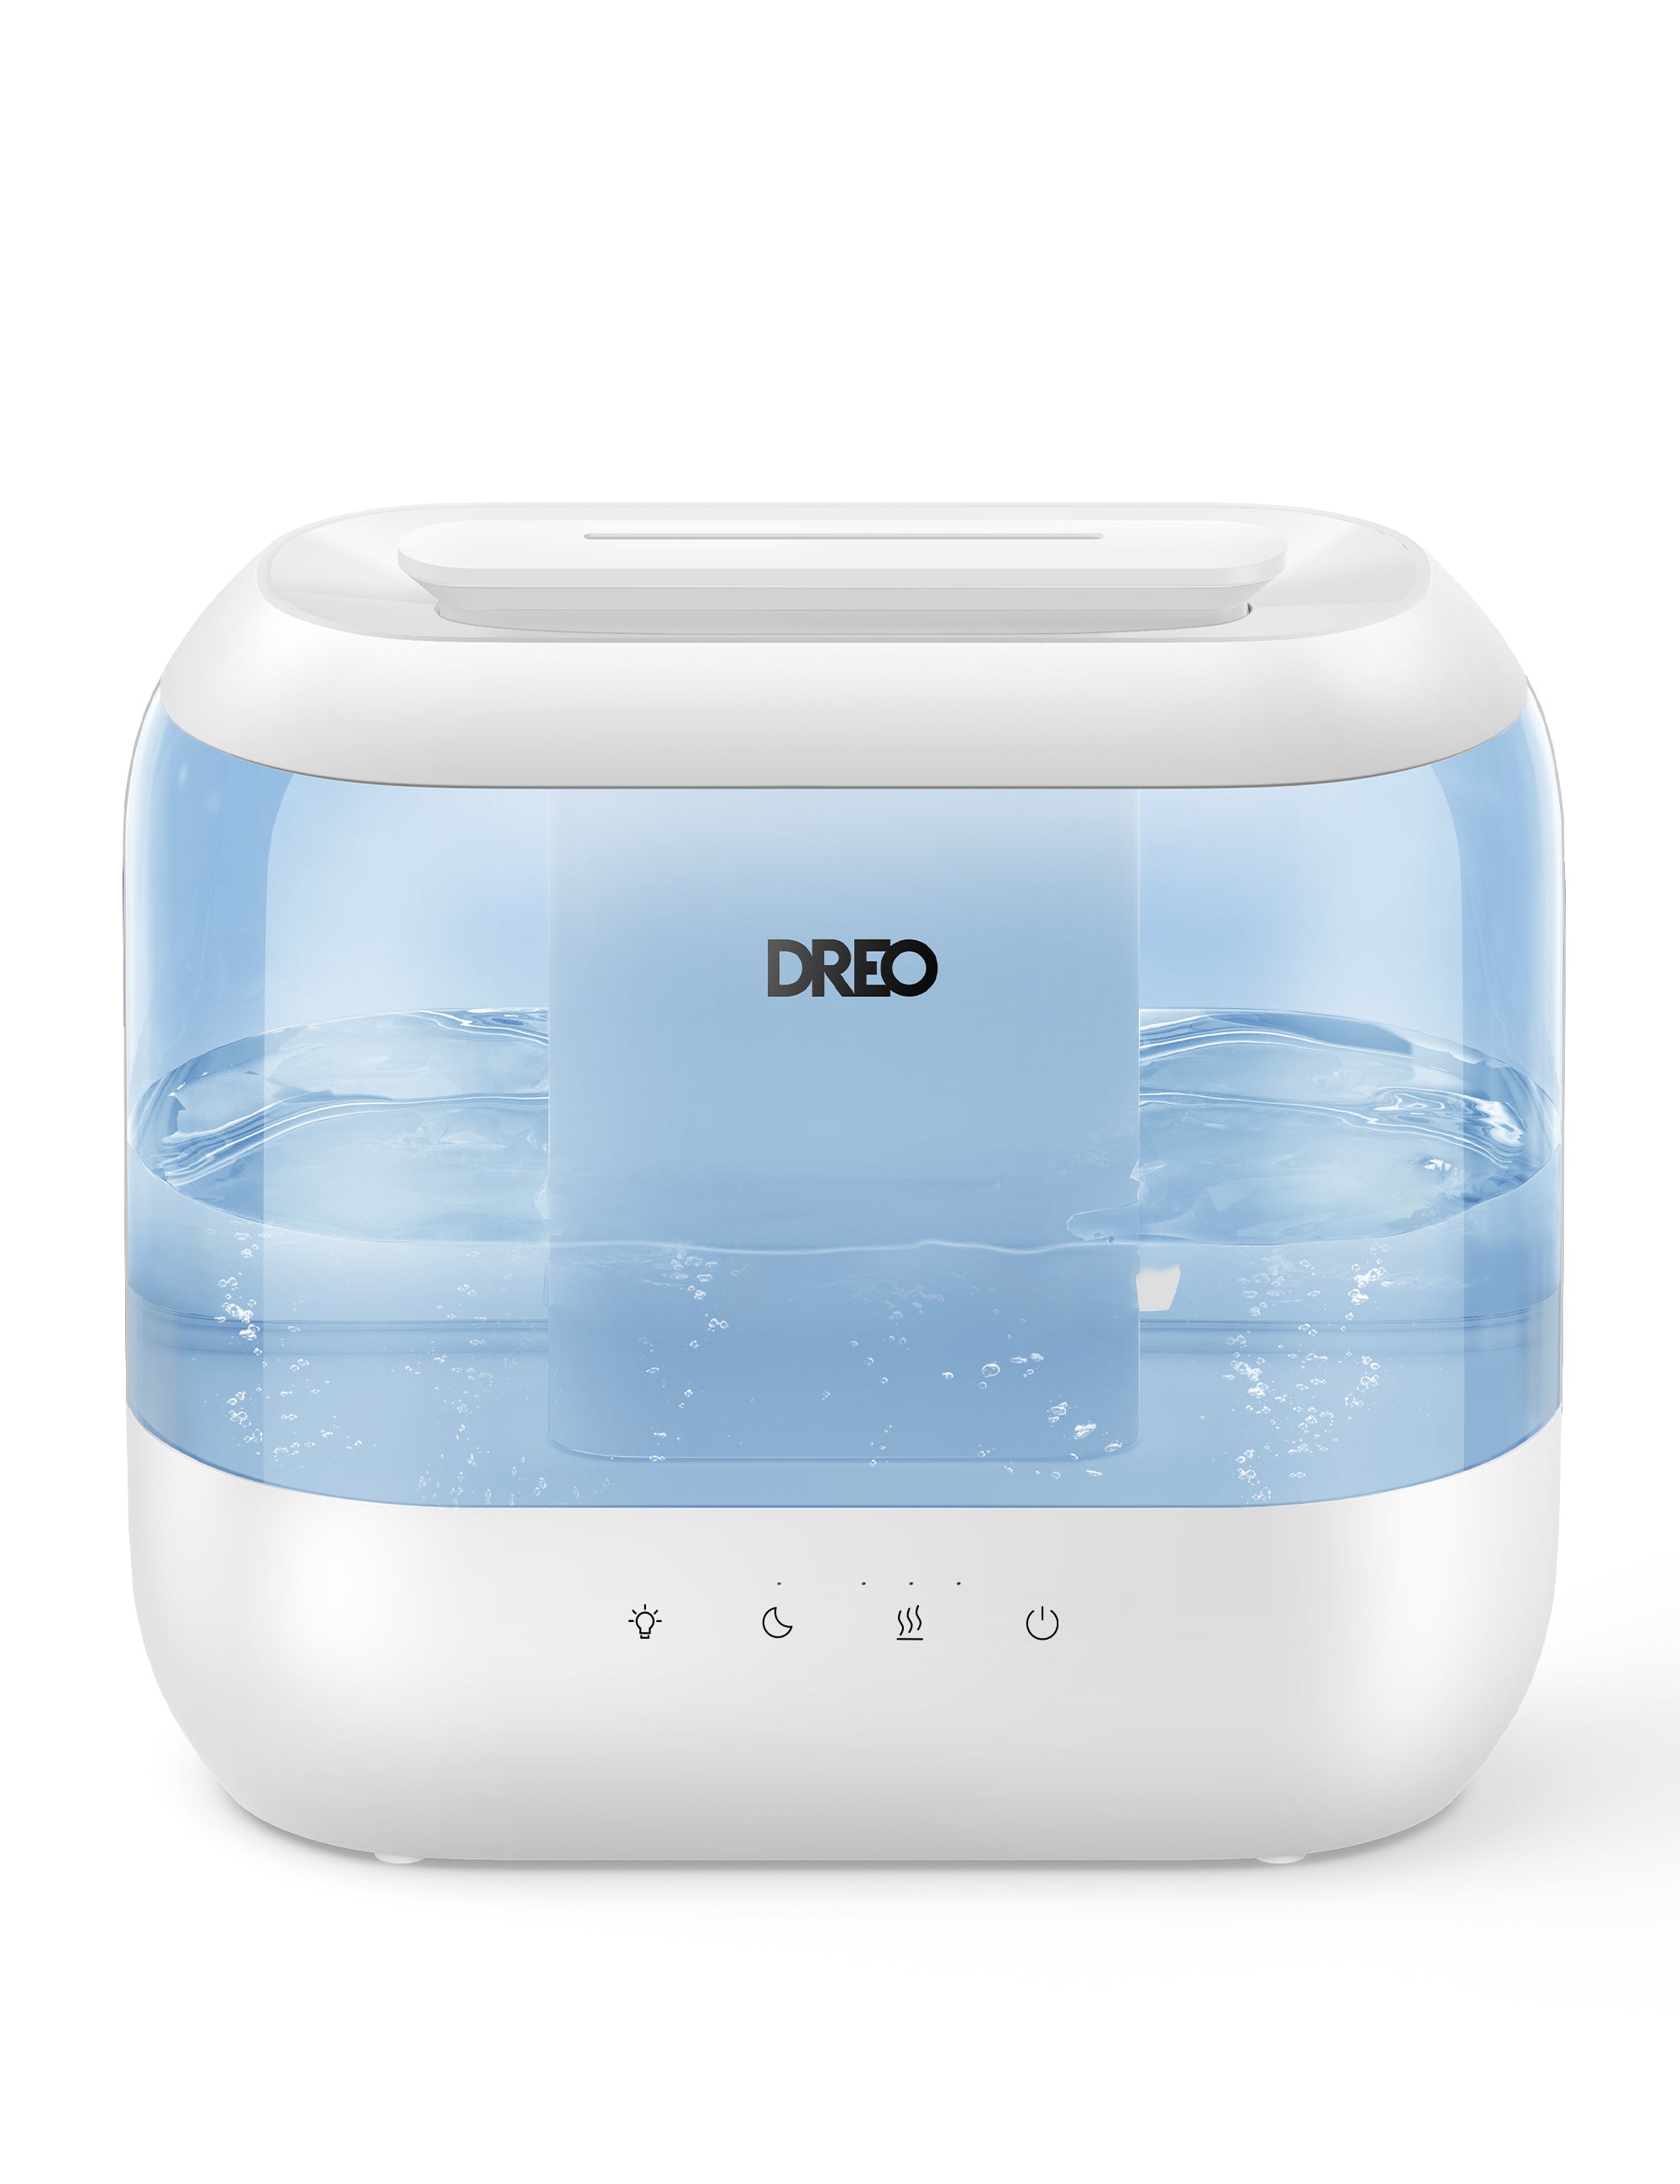 Dreo Humidifier for Bedroom, Quiet 4L Cool Mist Top-Fill Ultrasonic Humidifiers With Essential Oils, LED Display With Night Light, Touch Control, Auto Shut-Off, Blue